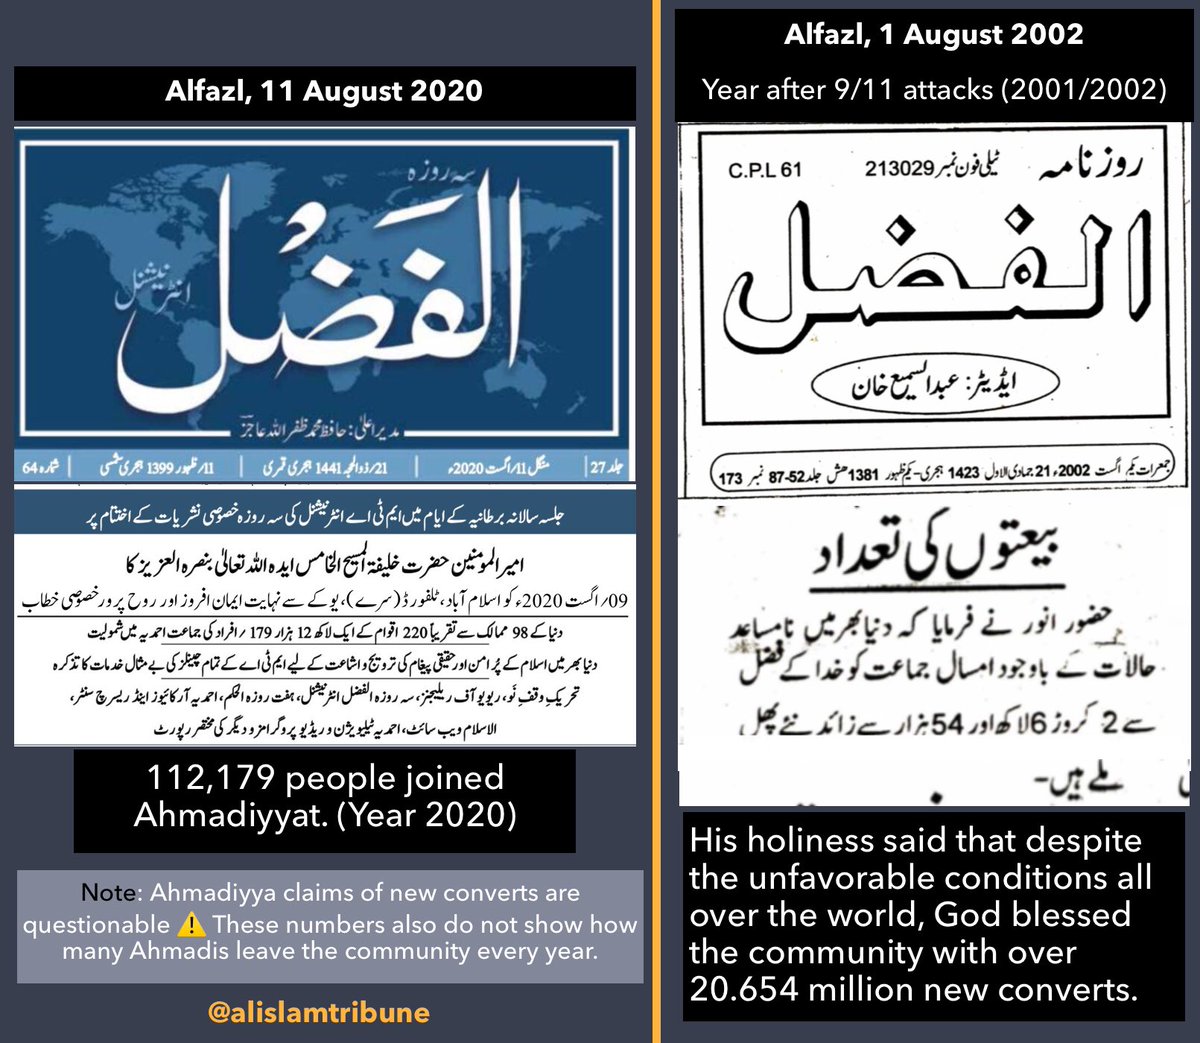 Why just 0.112 million converts in 2020 when staggering 20.6 million people converted to Ahmadiyyat in 2001/2002, after the 9/11 terrorist attacks.Isn’t COVID-19 a warning from God that should enable more conversions to the “TrueIslam”?Is God working against Ahmadiyyat?6/7